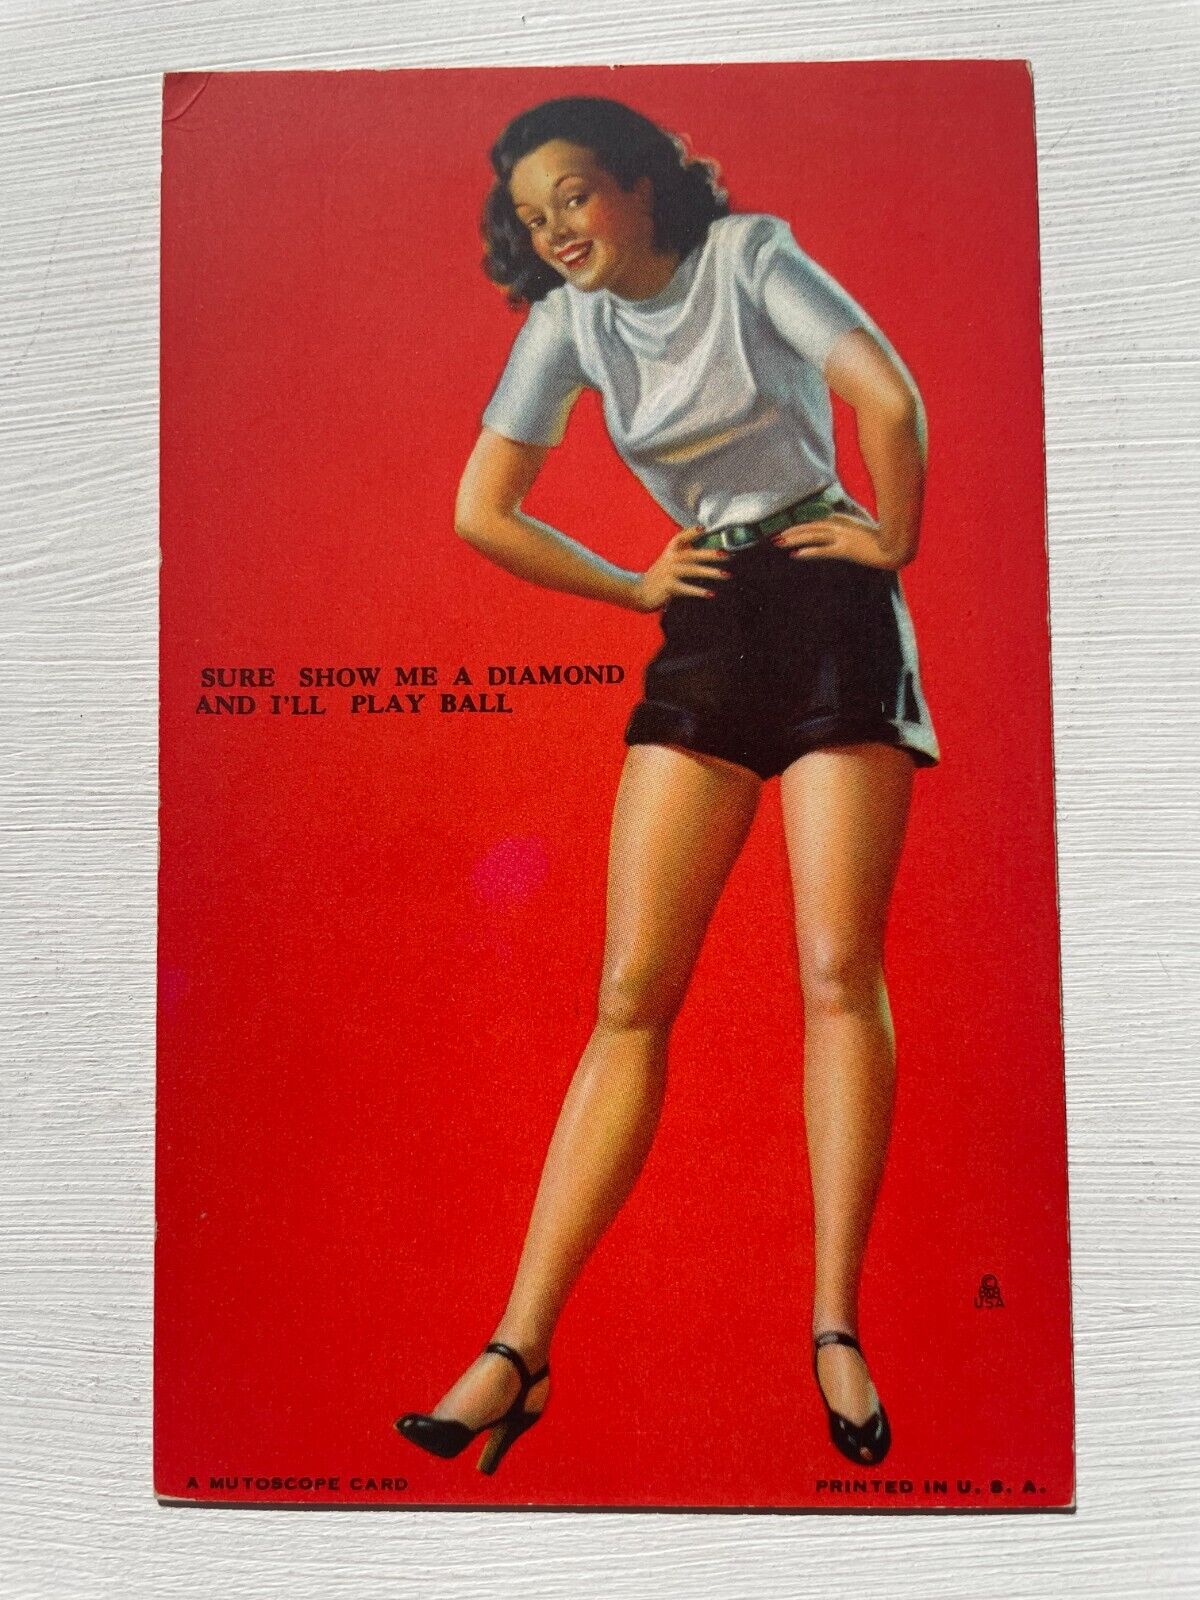 Vintage 1940's Pinup Girl Picture Mutoscope Card- Show Me A Diamond